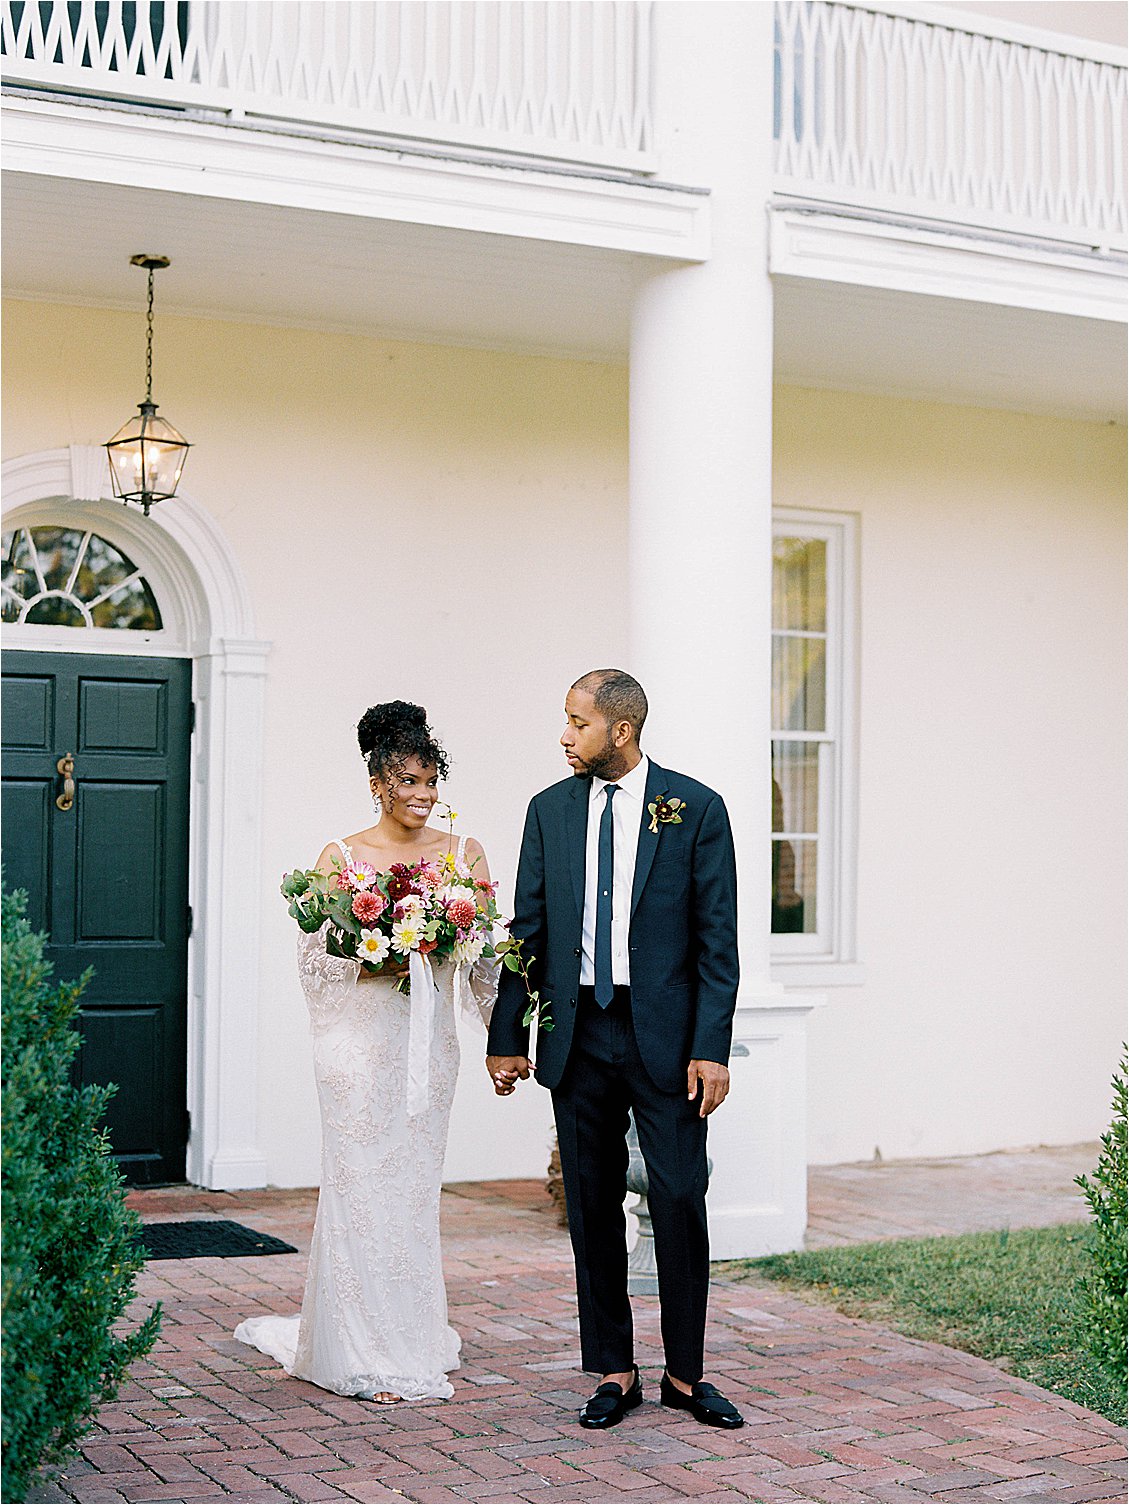 Couple gets ready for Vow Renewal at Mt. Airy Mansion in Upper Marlboro, Maryland with DC + Destination film wedding photographer Renee Hollingshead